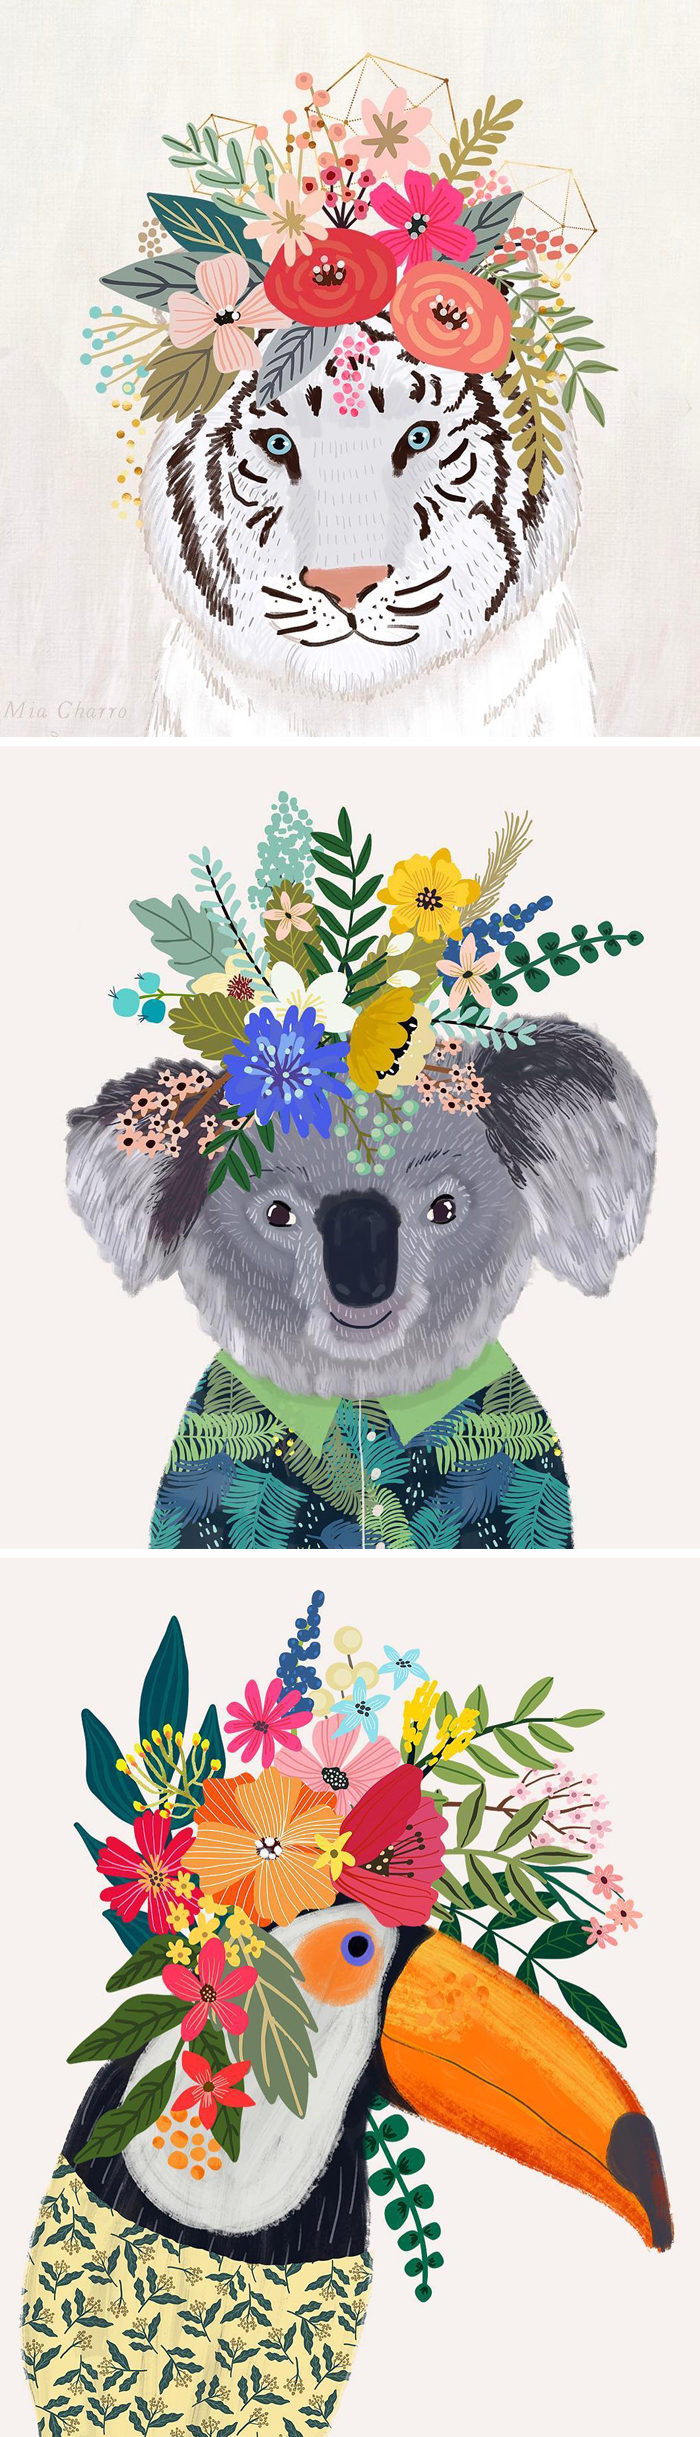 Animal wearing flower crowns illustrated by Mia Charo